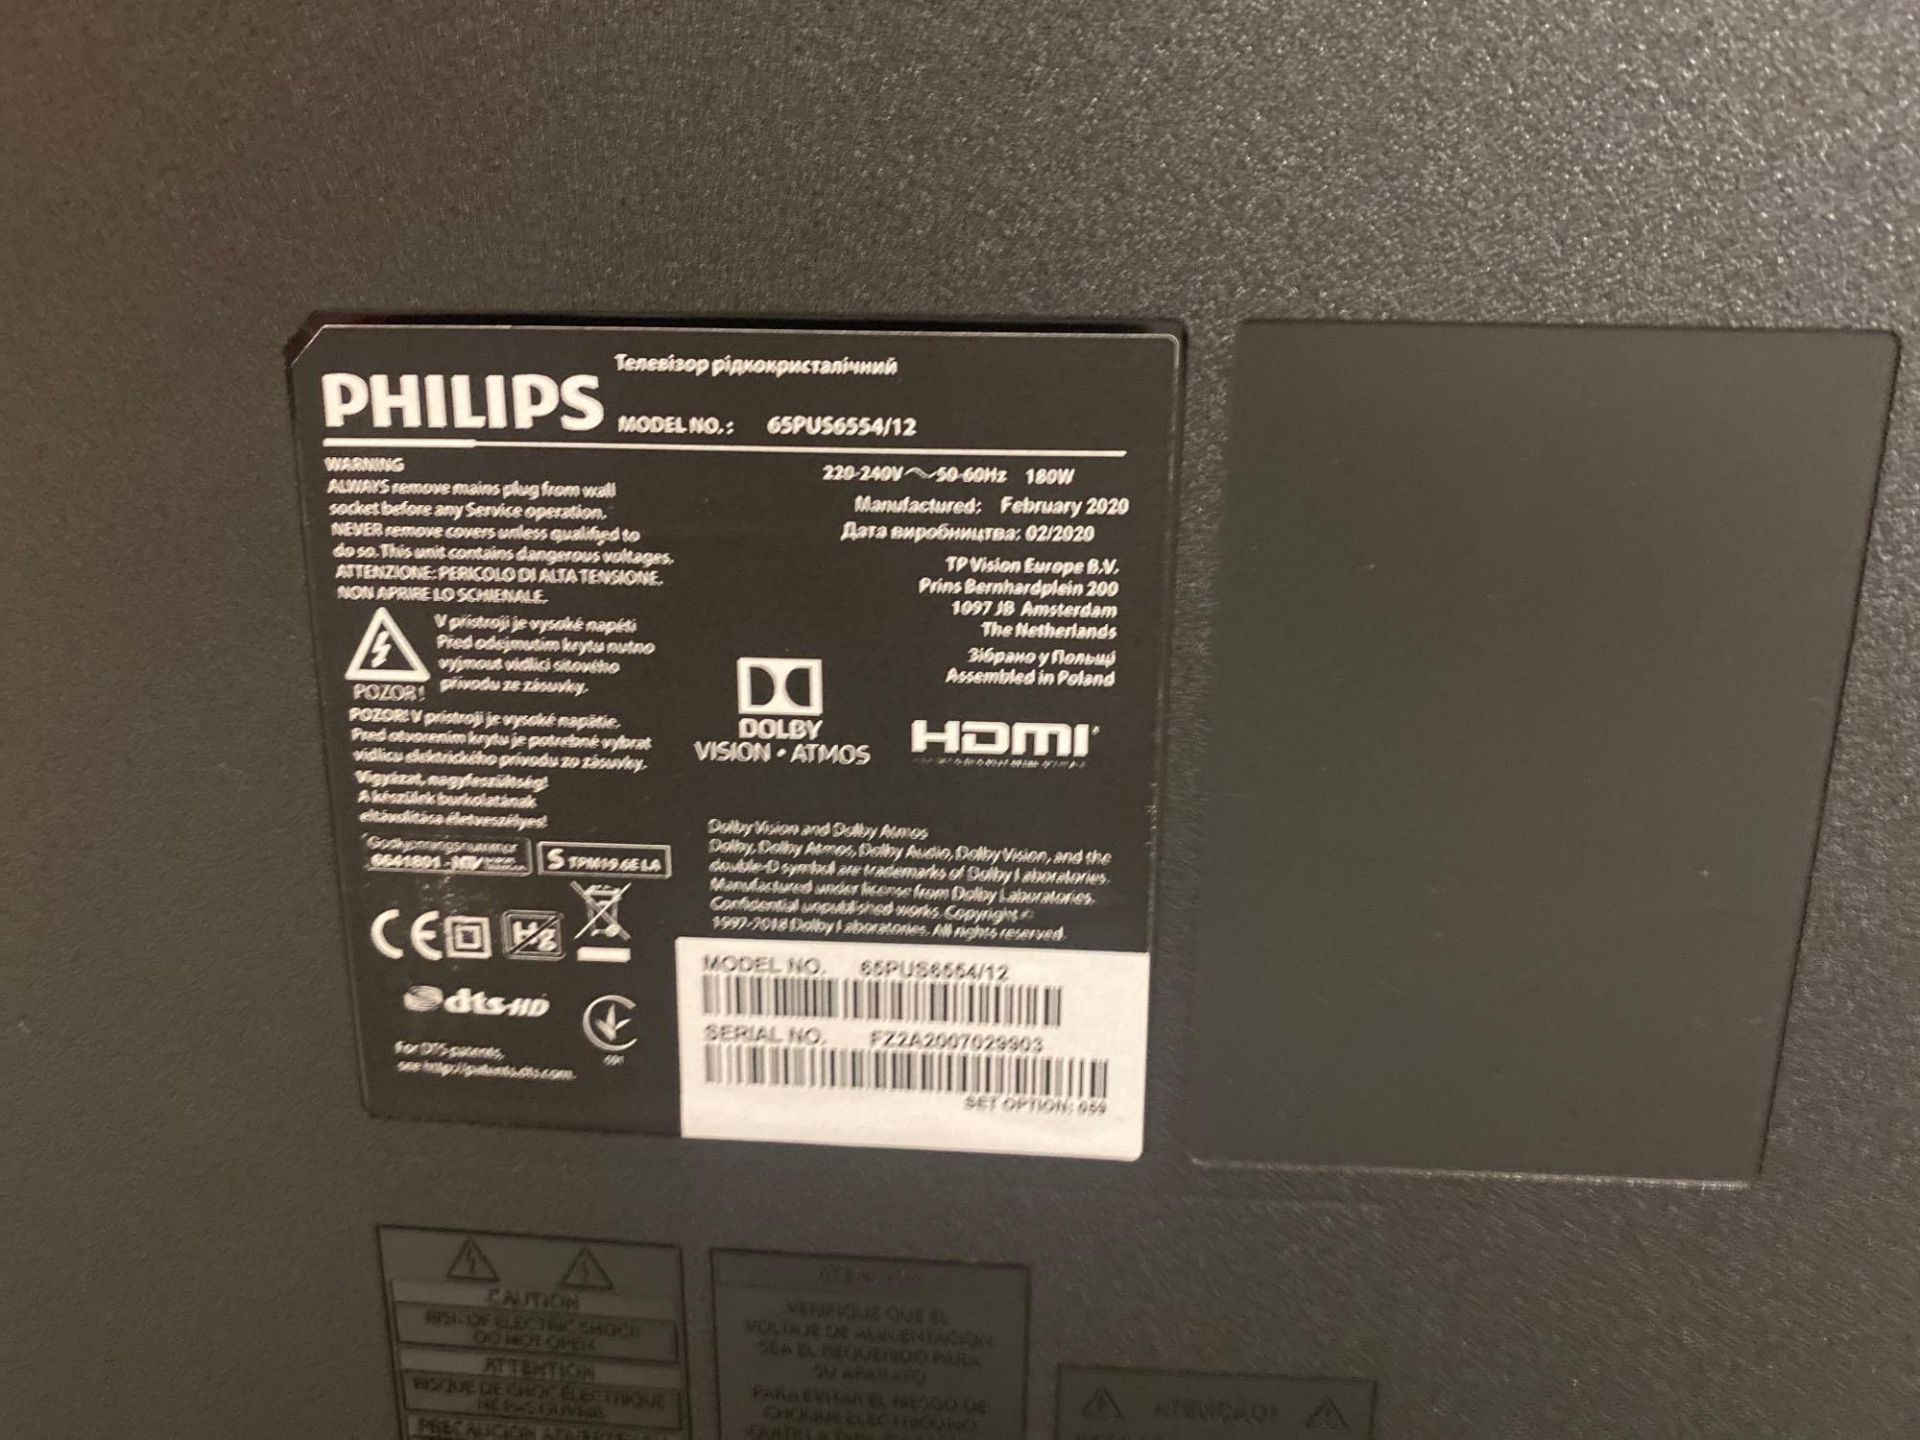 Phillips 65 inch 4K ultra HD LED TV model number 65PUS6554–12 - Image 4 of 4